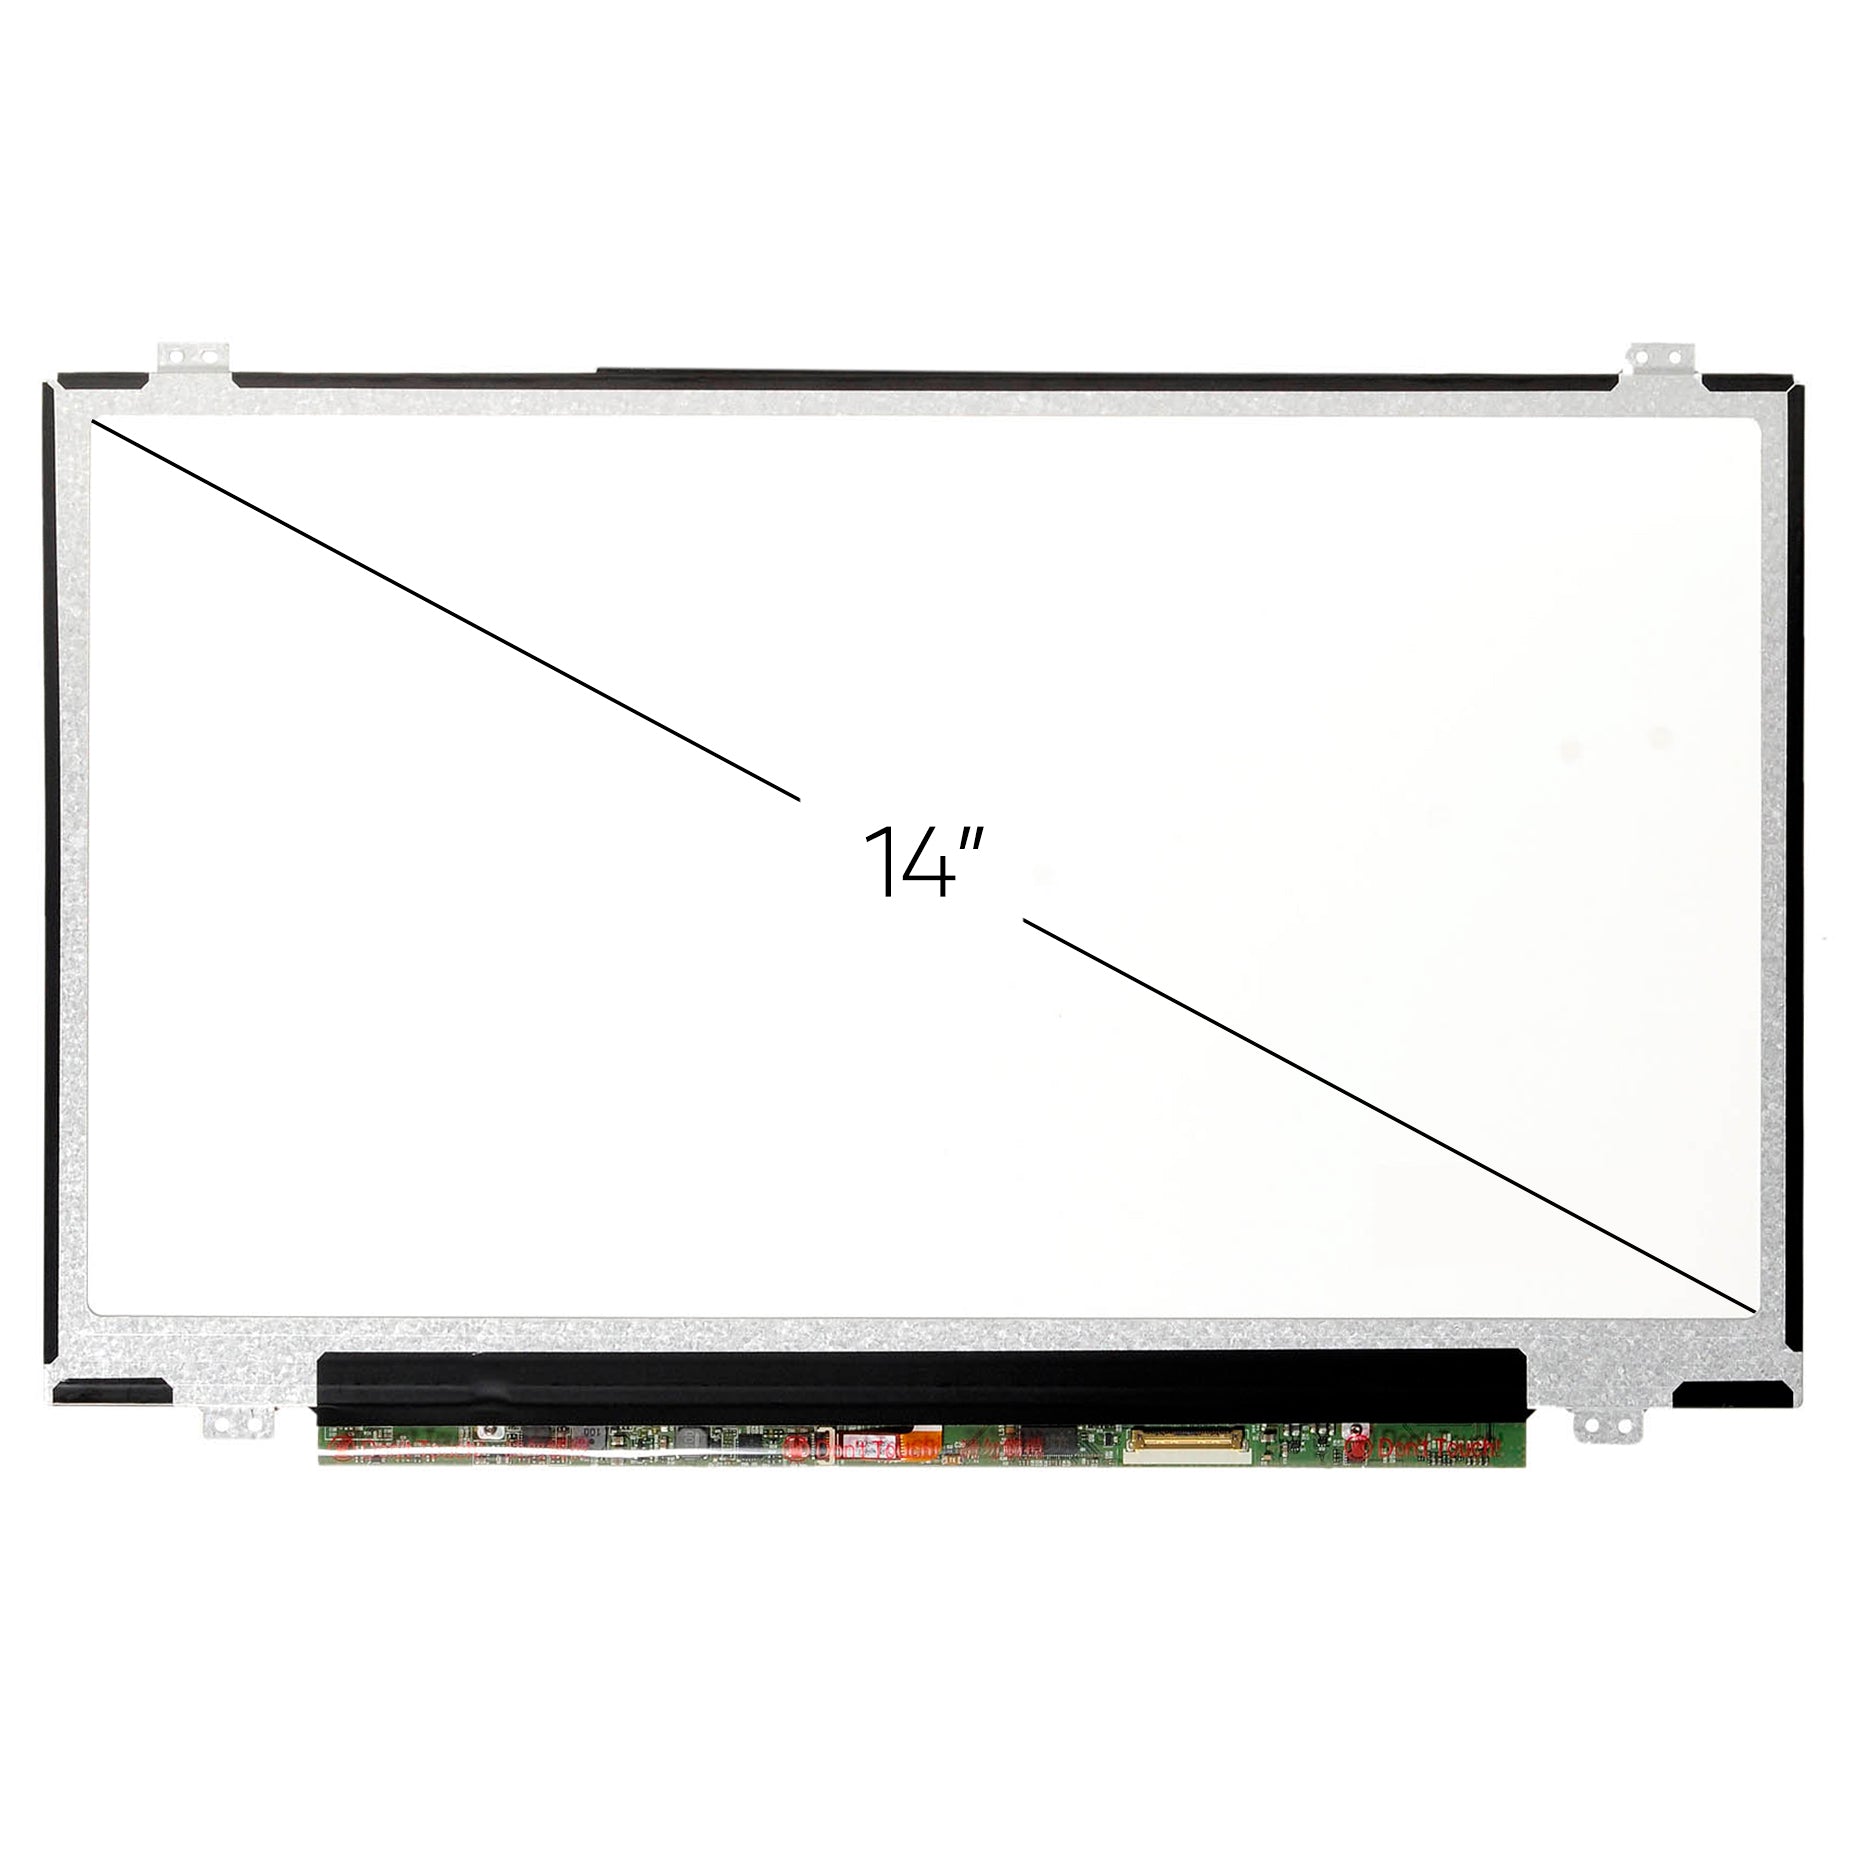 Screen Replacement for HP Chromebook 14-CA003CL 7YB67UA FHD 1920x1080 IPS Matte LCD LED Display